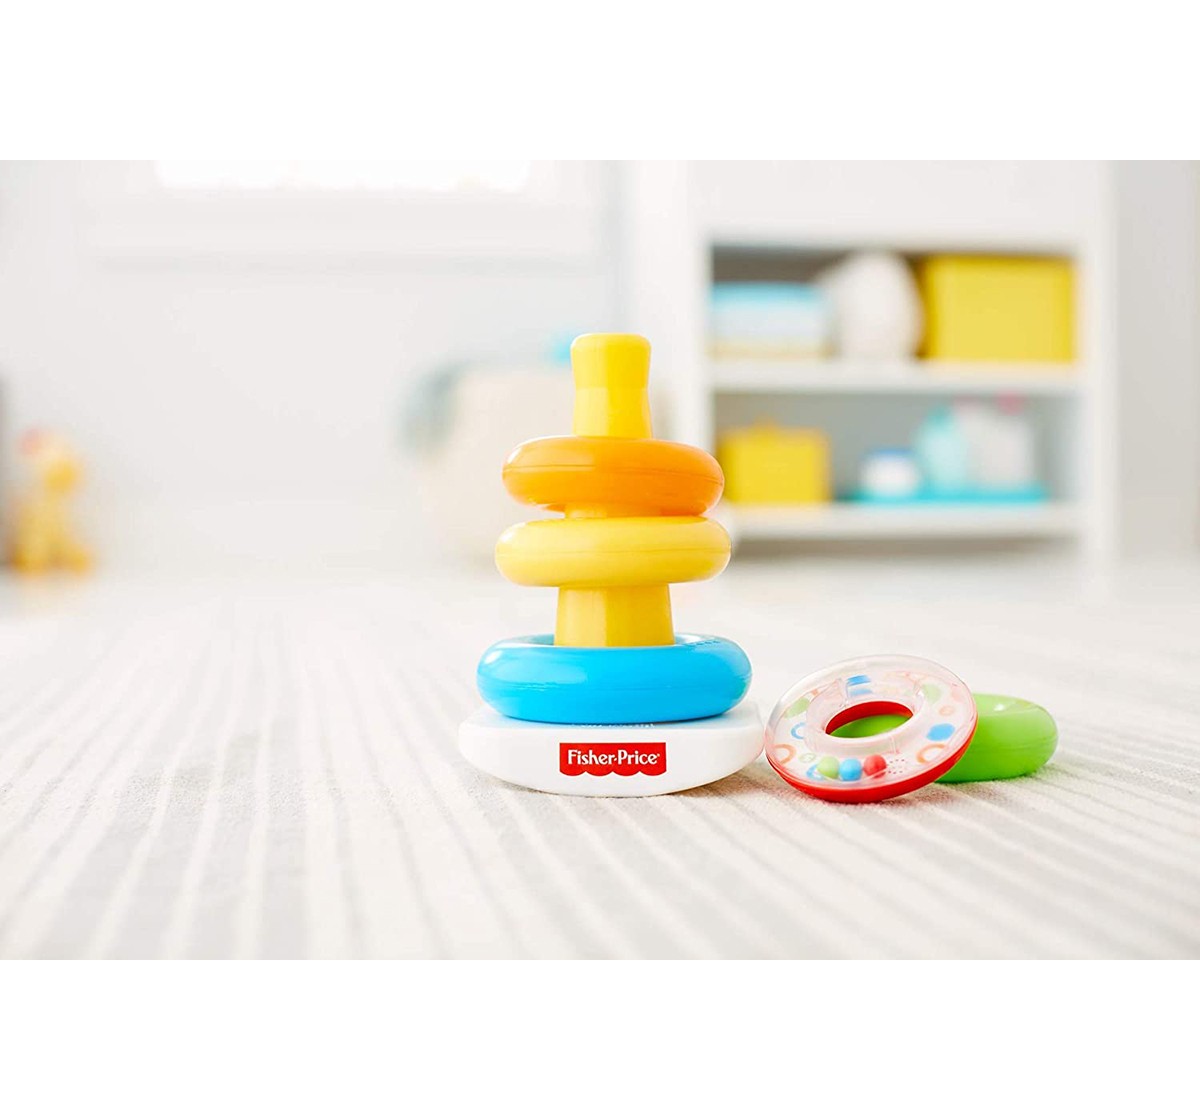 Fisher-Price Brilliant Basics Rock-a-Stack, Multicolor Activity Toys for Kids age 6M+ 